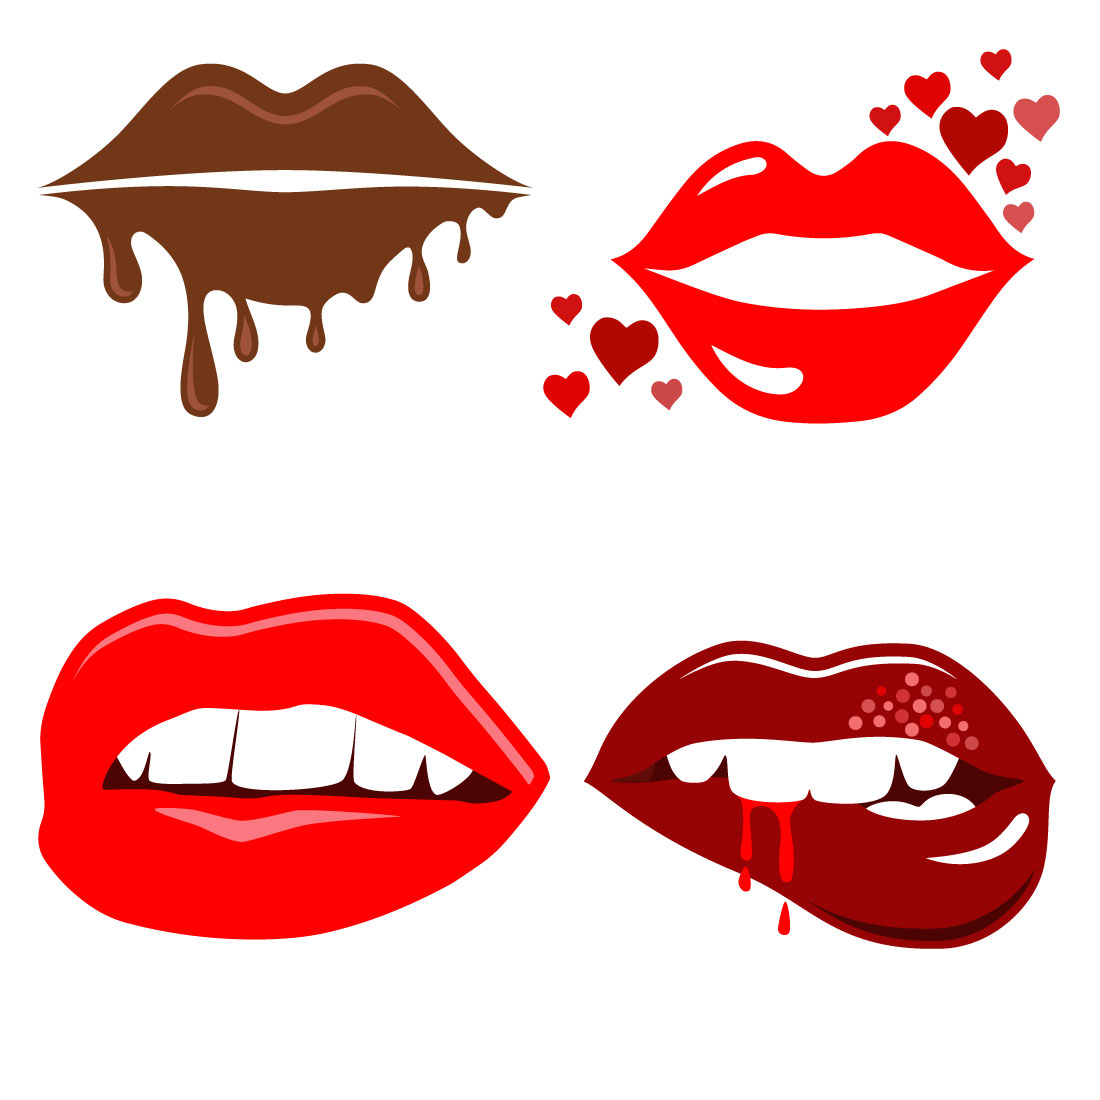 25+ Best Lips SVG Images in 2023: Free and Paid - MasterBundles